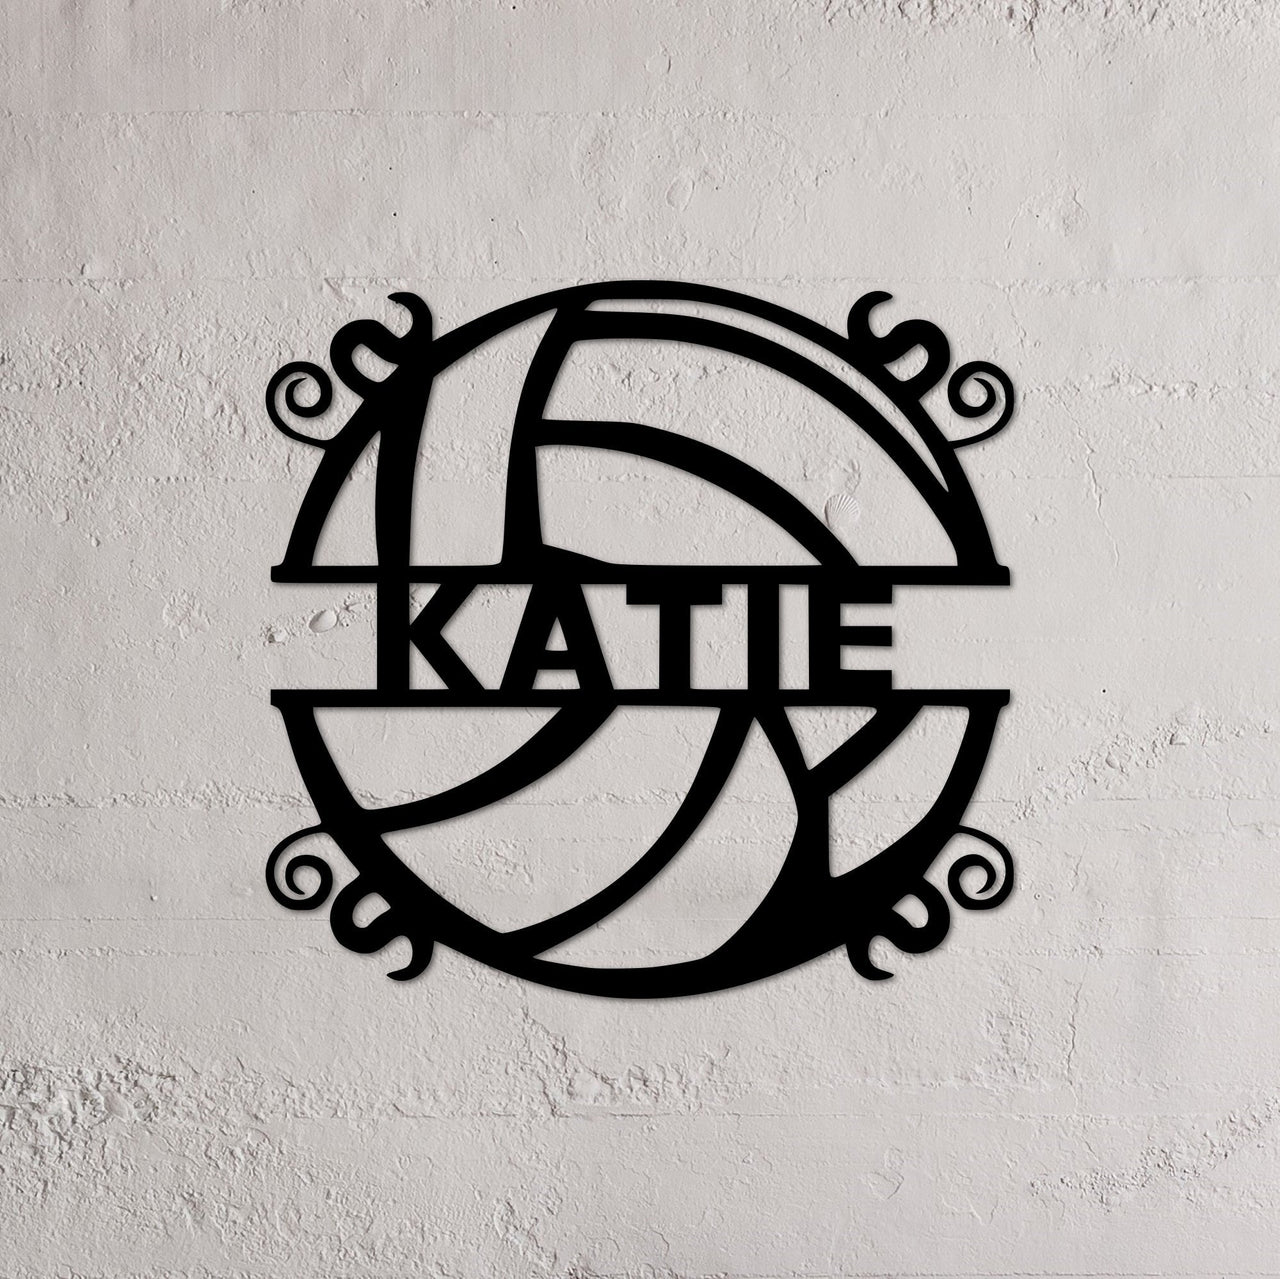 Custom Volleyball Name Sign | Metal Volleyball Name Wall Art | Sports Decor | Kids Room Decor | Personalized Teen Birthday Gift Idea